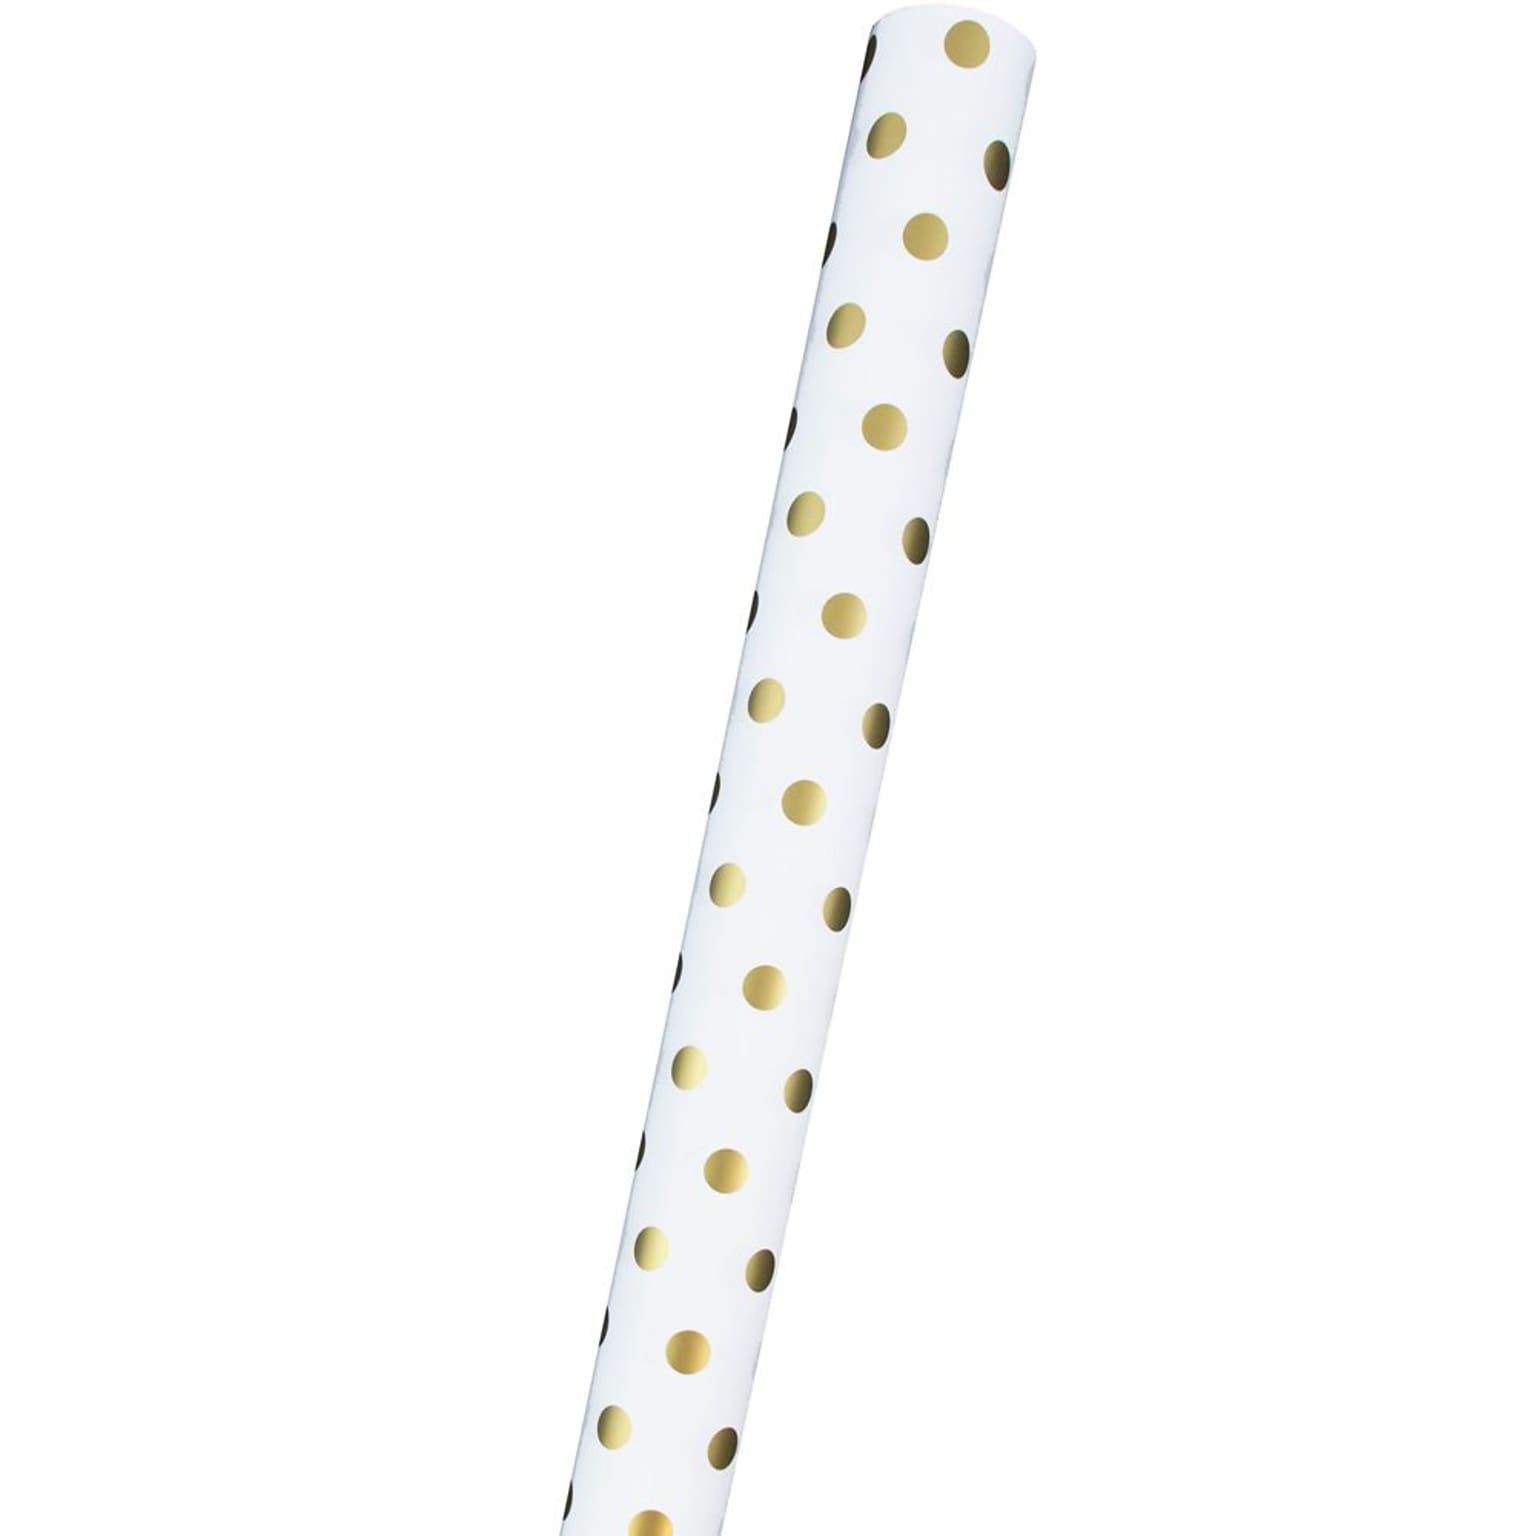 JAM Paper® Polka Dot Gift Wrapping Paper, 25 Sq Ft, White with Gold Dots, Sold Individually (226432220)